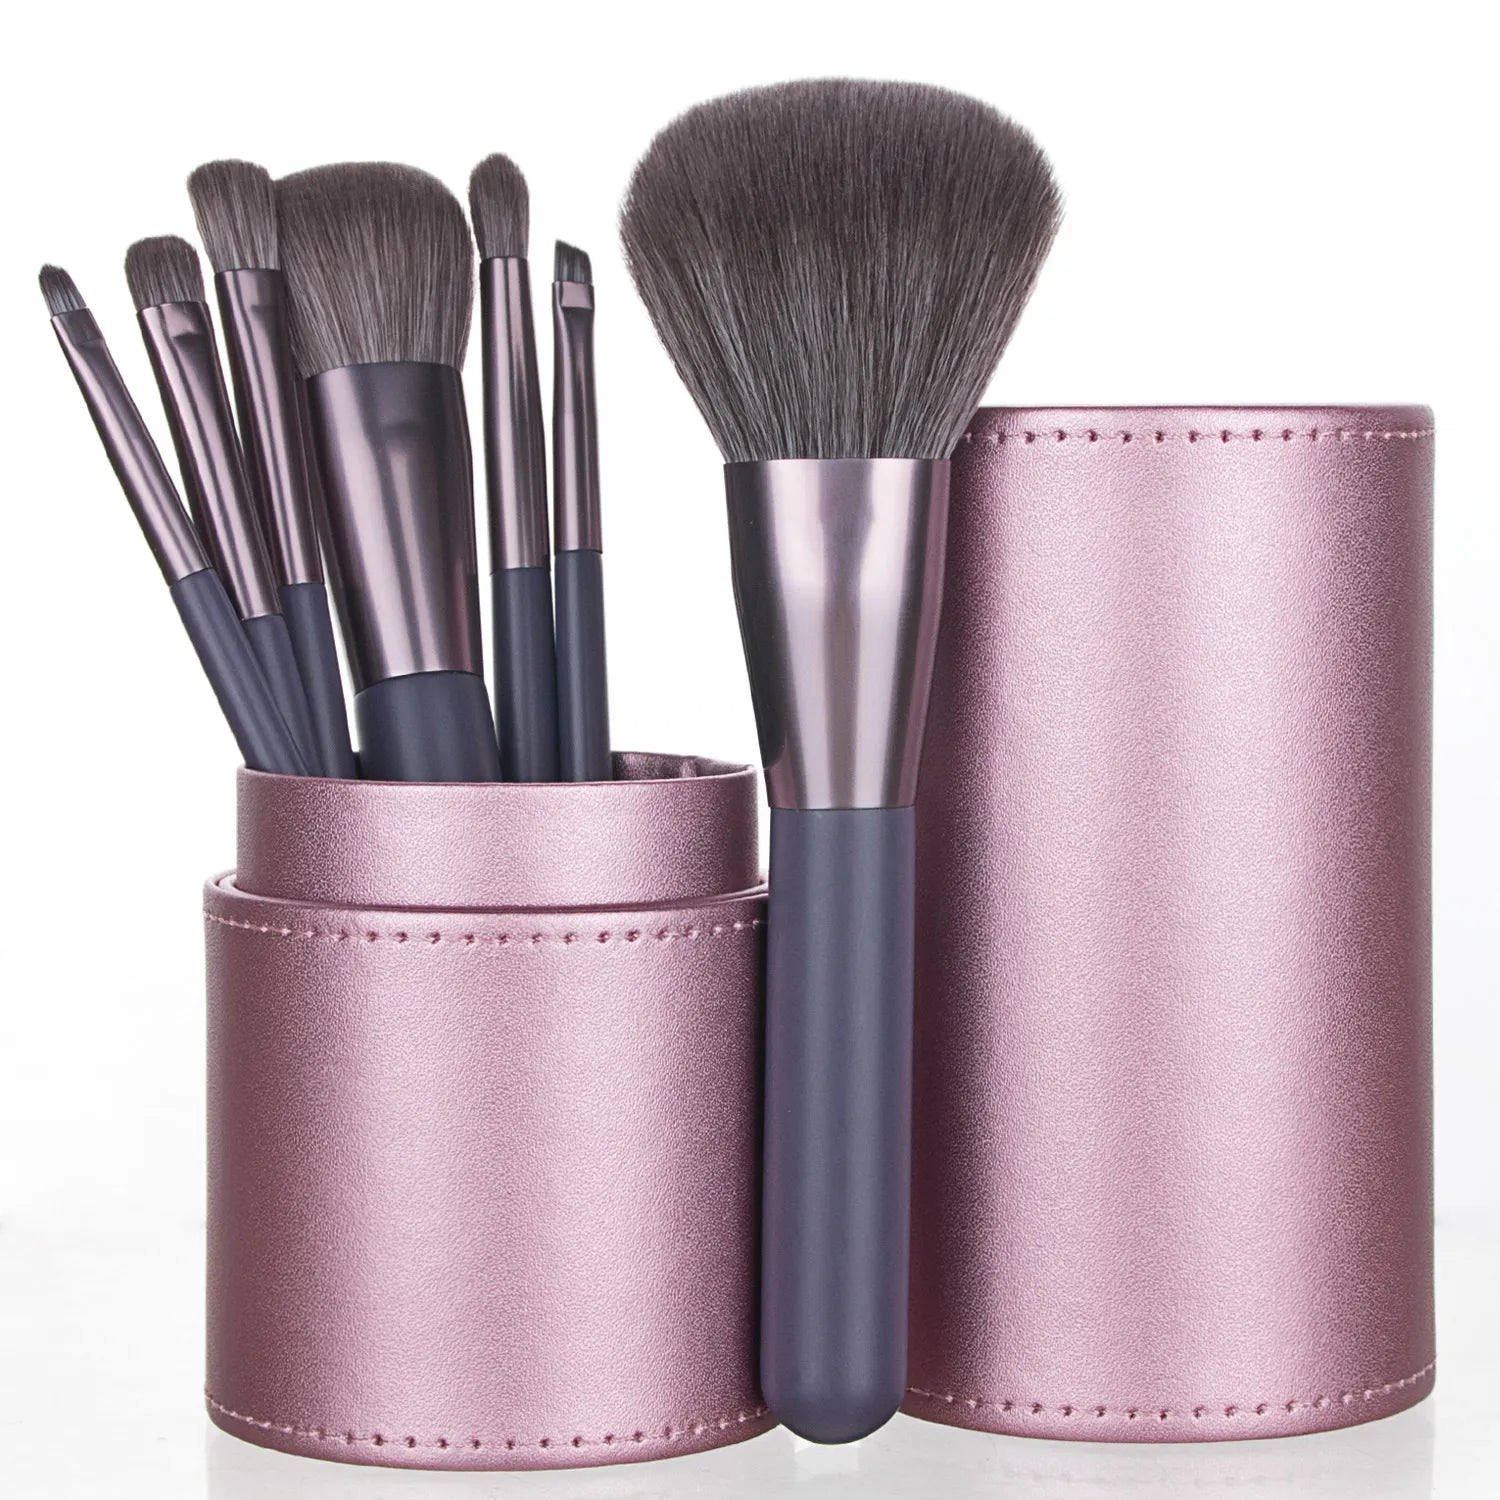 Luxurious Makeup Brush Set: Premium Beauty Tools for Flawless Application